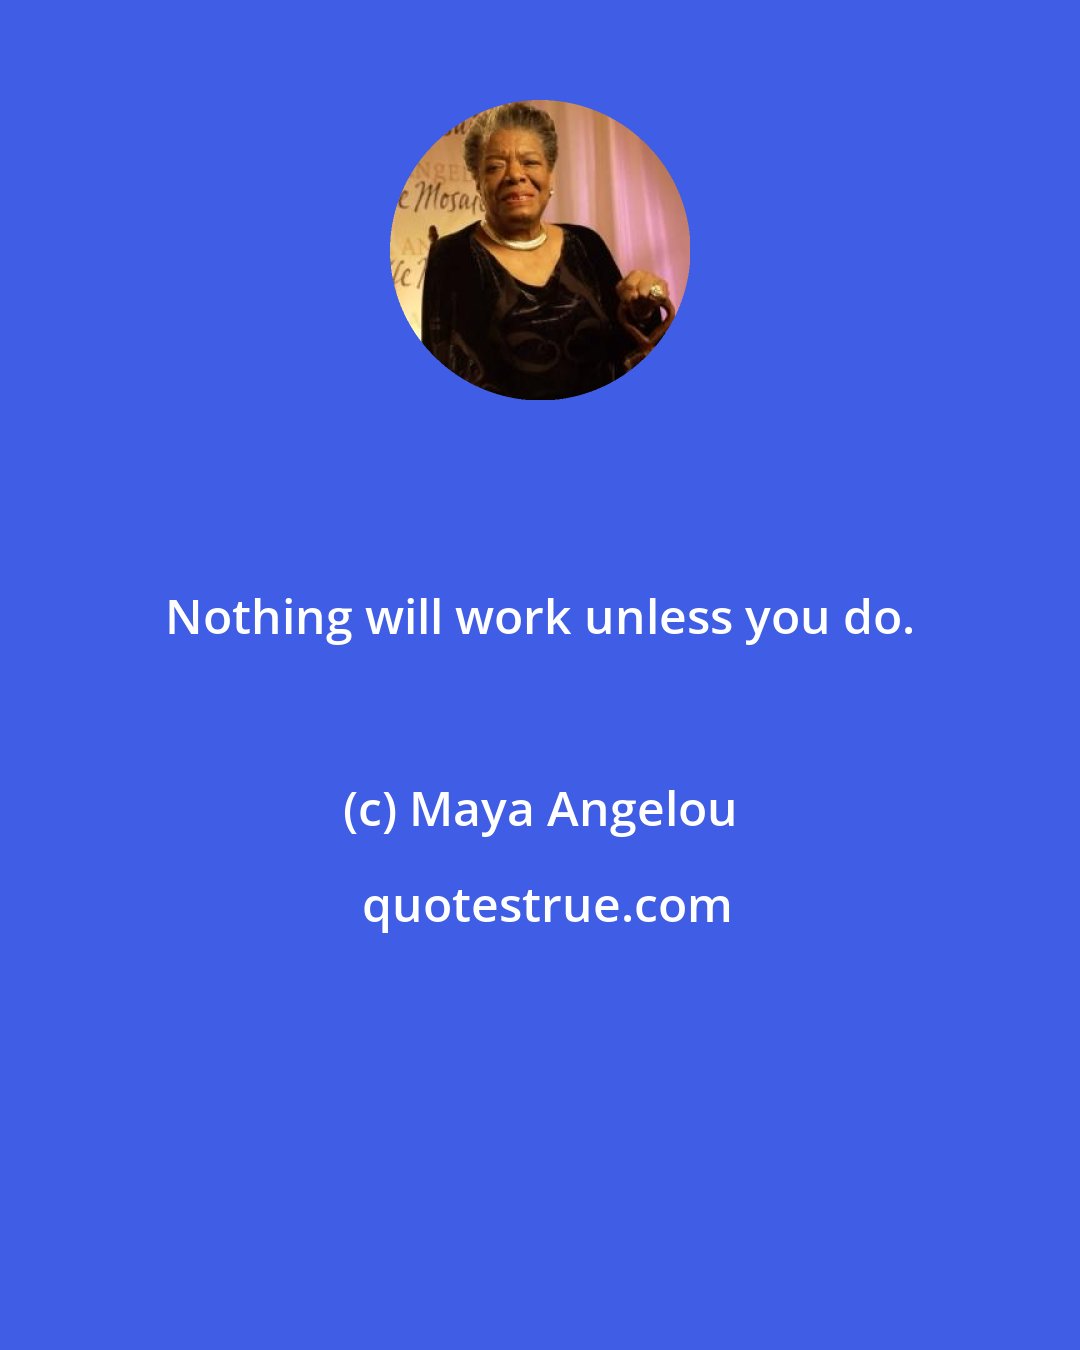 Maya Angelou: Nothing will work unless you do.